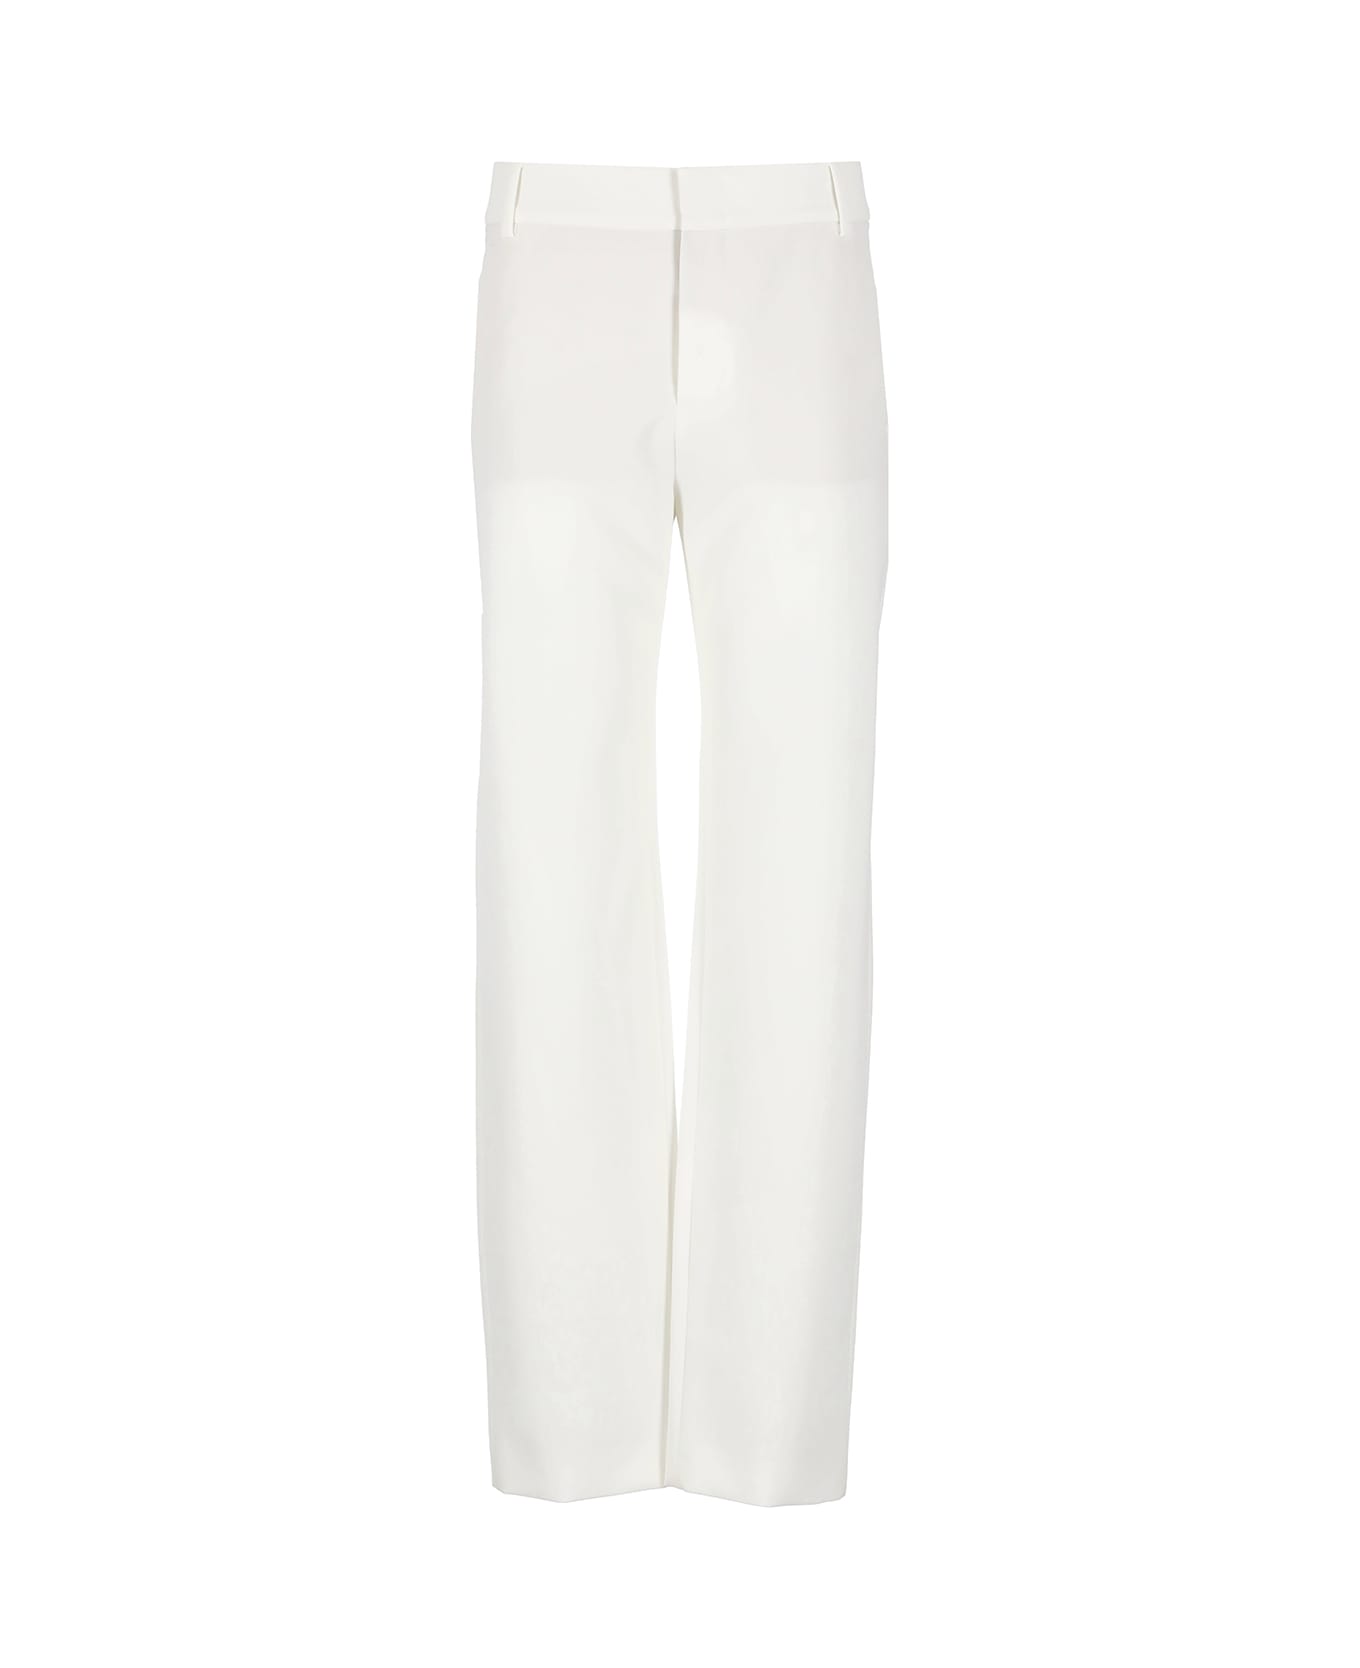 M05CH1N0 Jeans Satin Trousers - White ボトムス